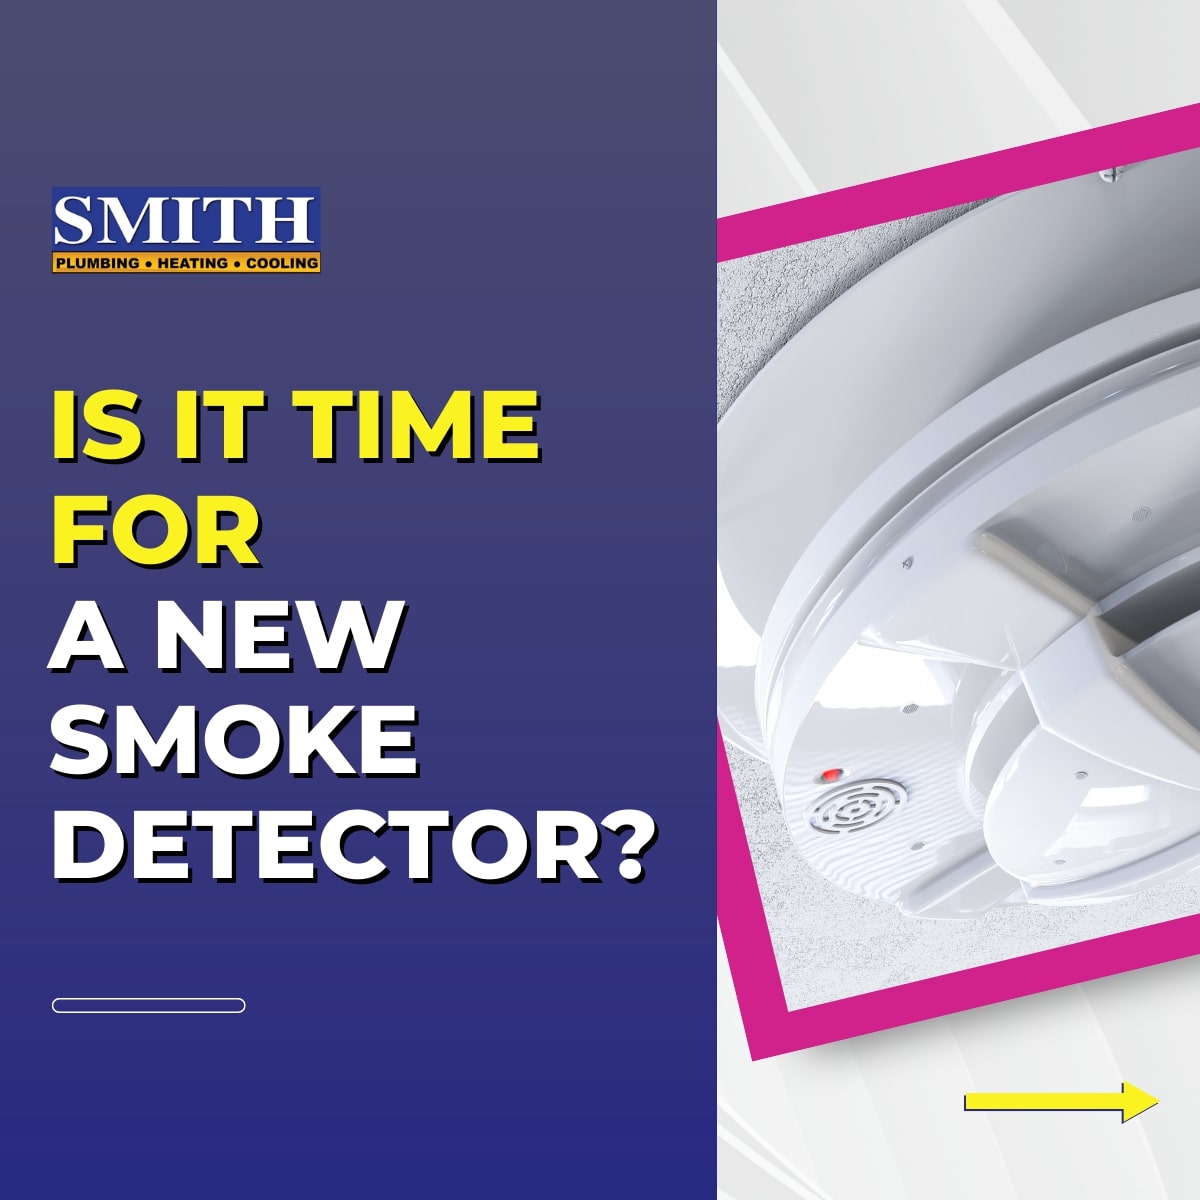 Smoke and carbon monoxide detectors - is it time for a new smoke detector? Cover